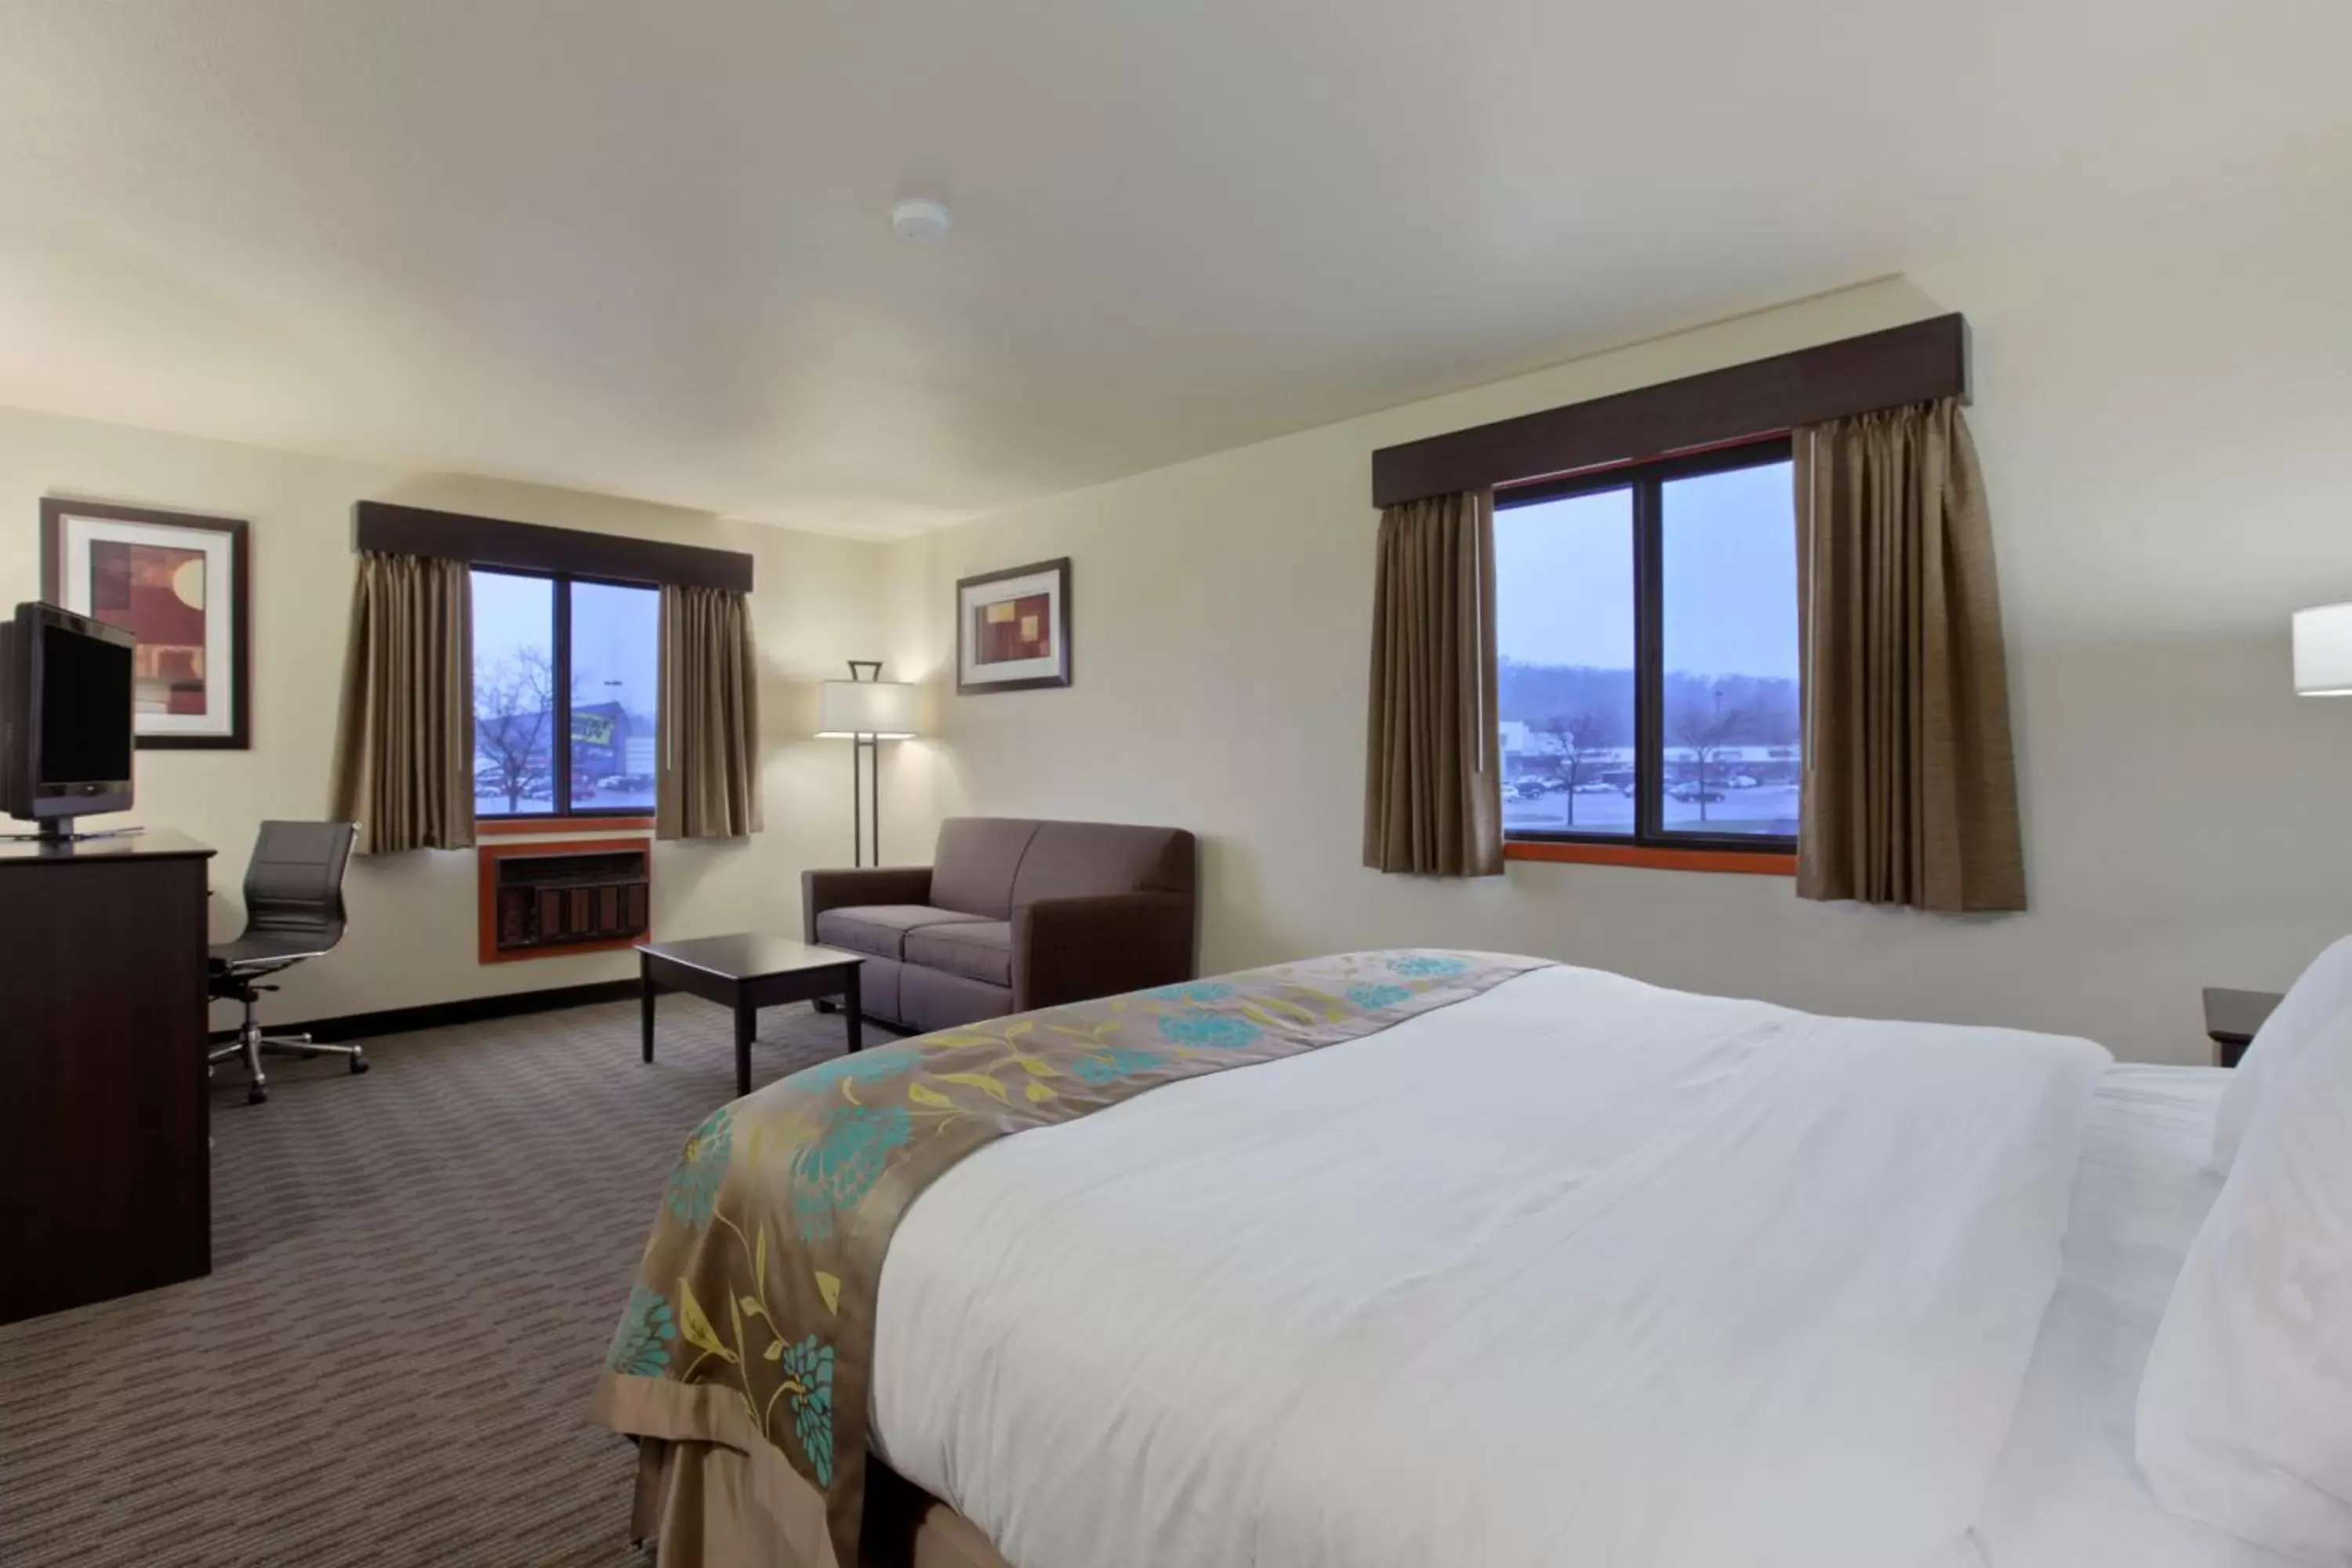 King Suite MoblilityAccessible - Non-Smoking in Baymont by Wyndham Eau Claire WI